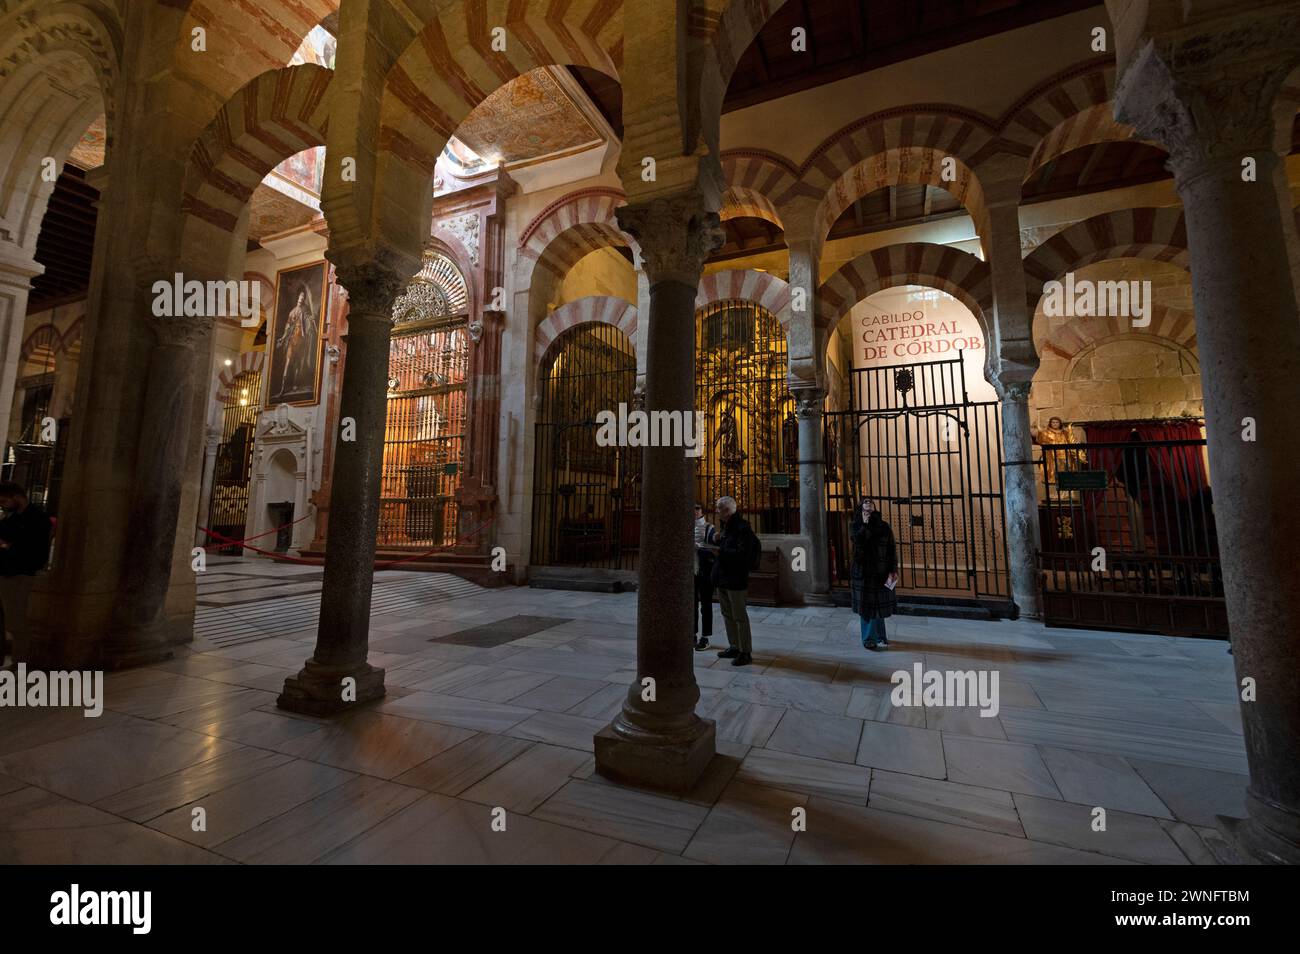 Some of the Christian funerary chapels and tombs inside the Mosque/Cathedral of Cordoba in the historic city of Cordoba in Andalusia in southern Spain Stock Photo